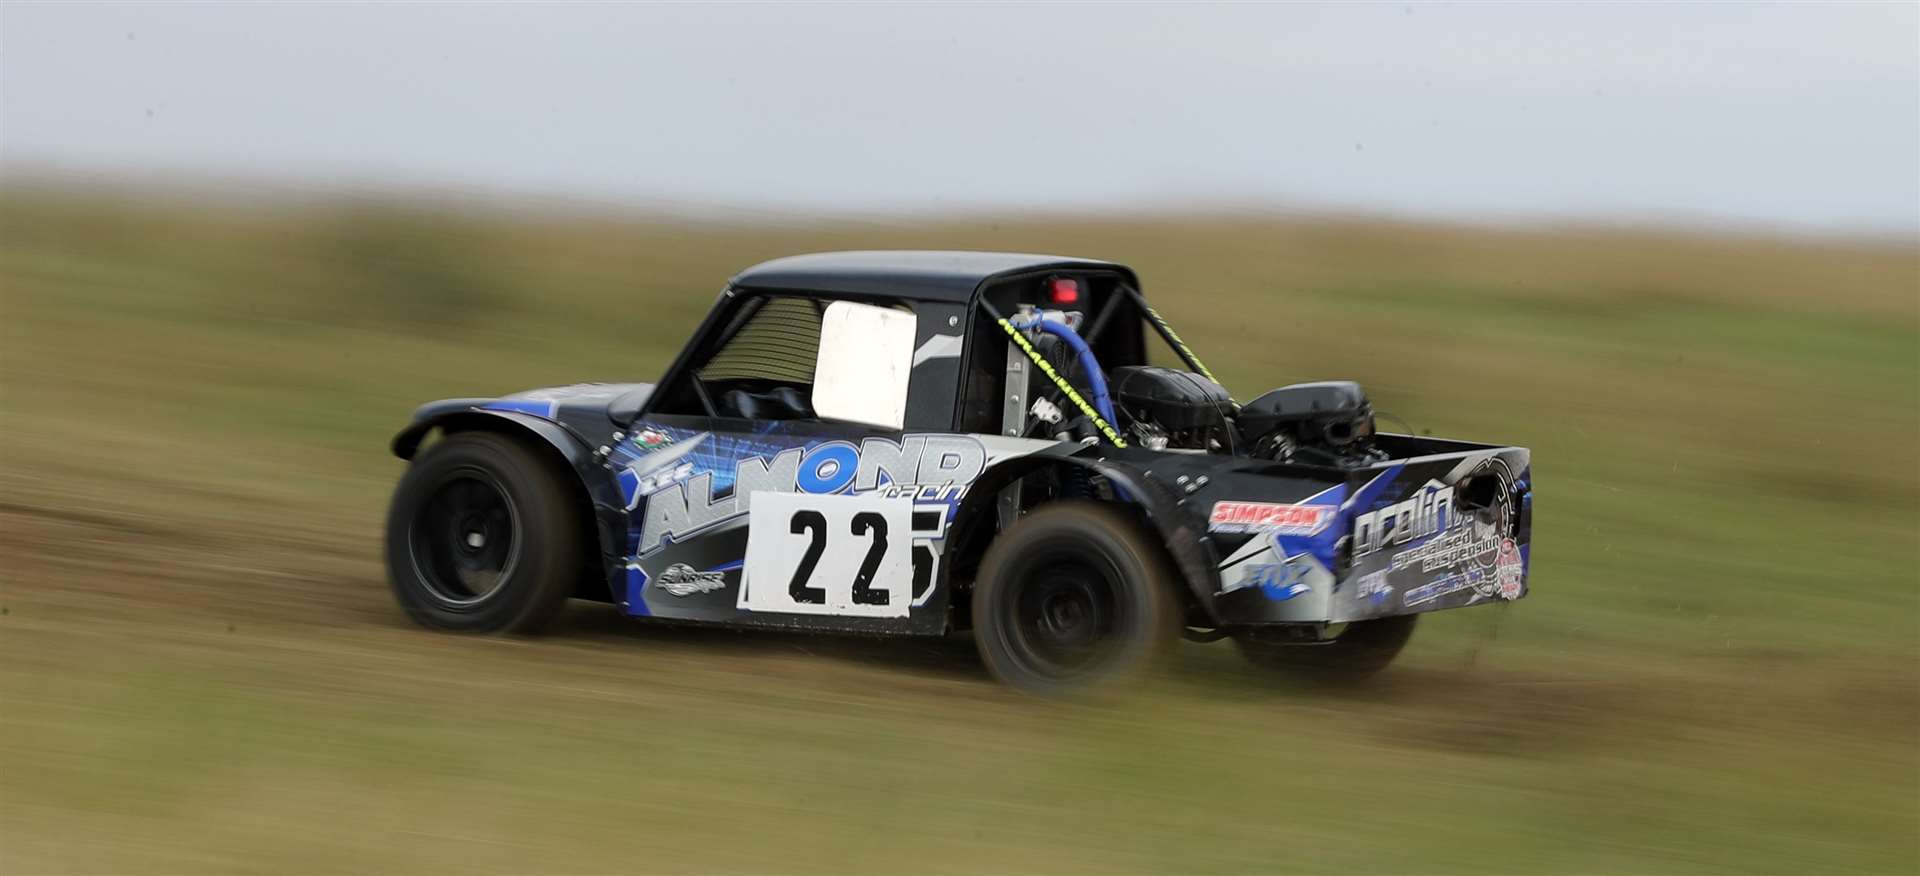 Gary Elder, in his twin-engined Mini special, racked up another win in the latest autocross event at Towerhill. Picture: James Gunn